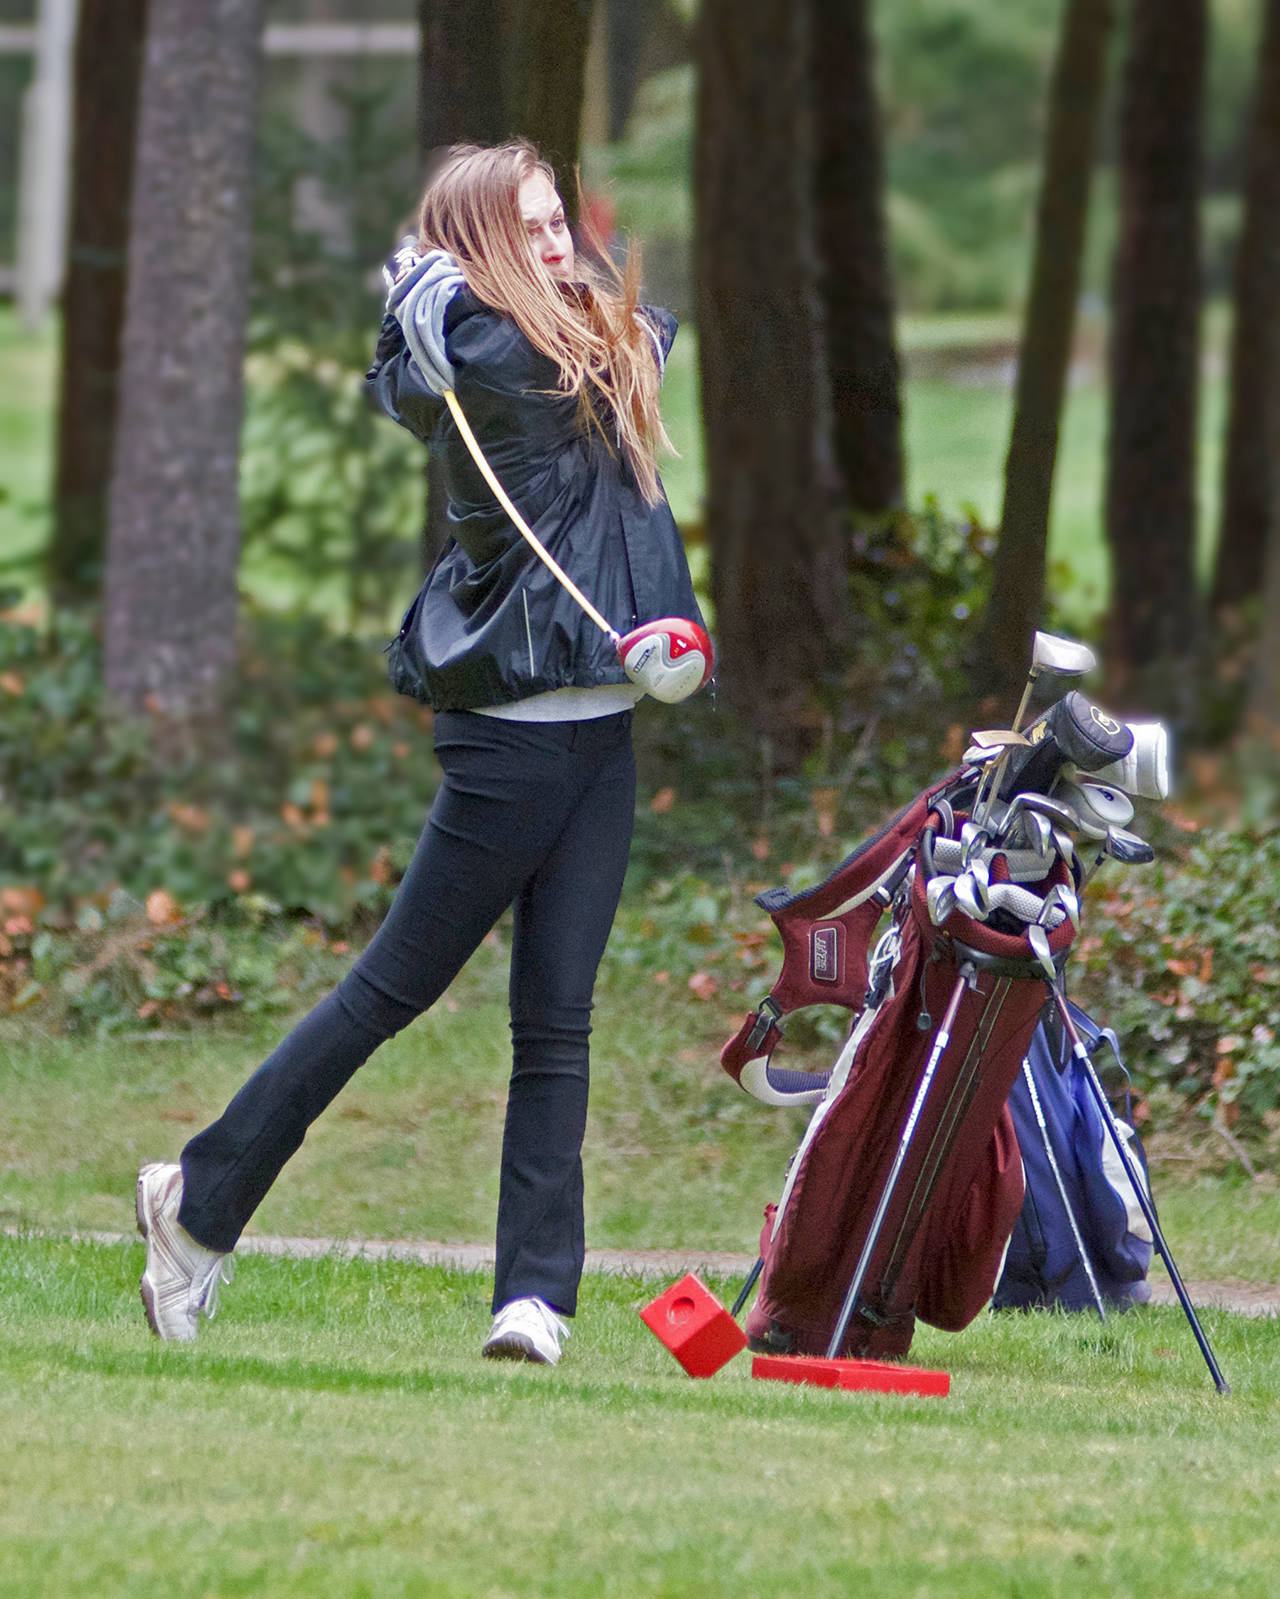 Kate Combs drives off the 6th tee at the Lopez golf course in the April 4 match versus Friday Harbor. Combs won top honors against Grace Academy on March 23. Photo by Gene Helfman.